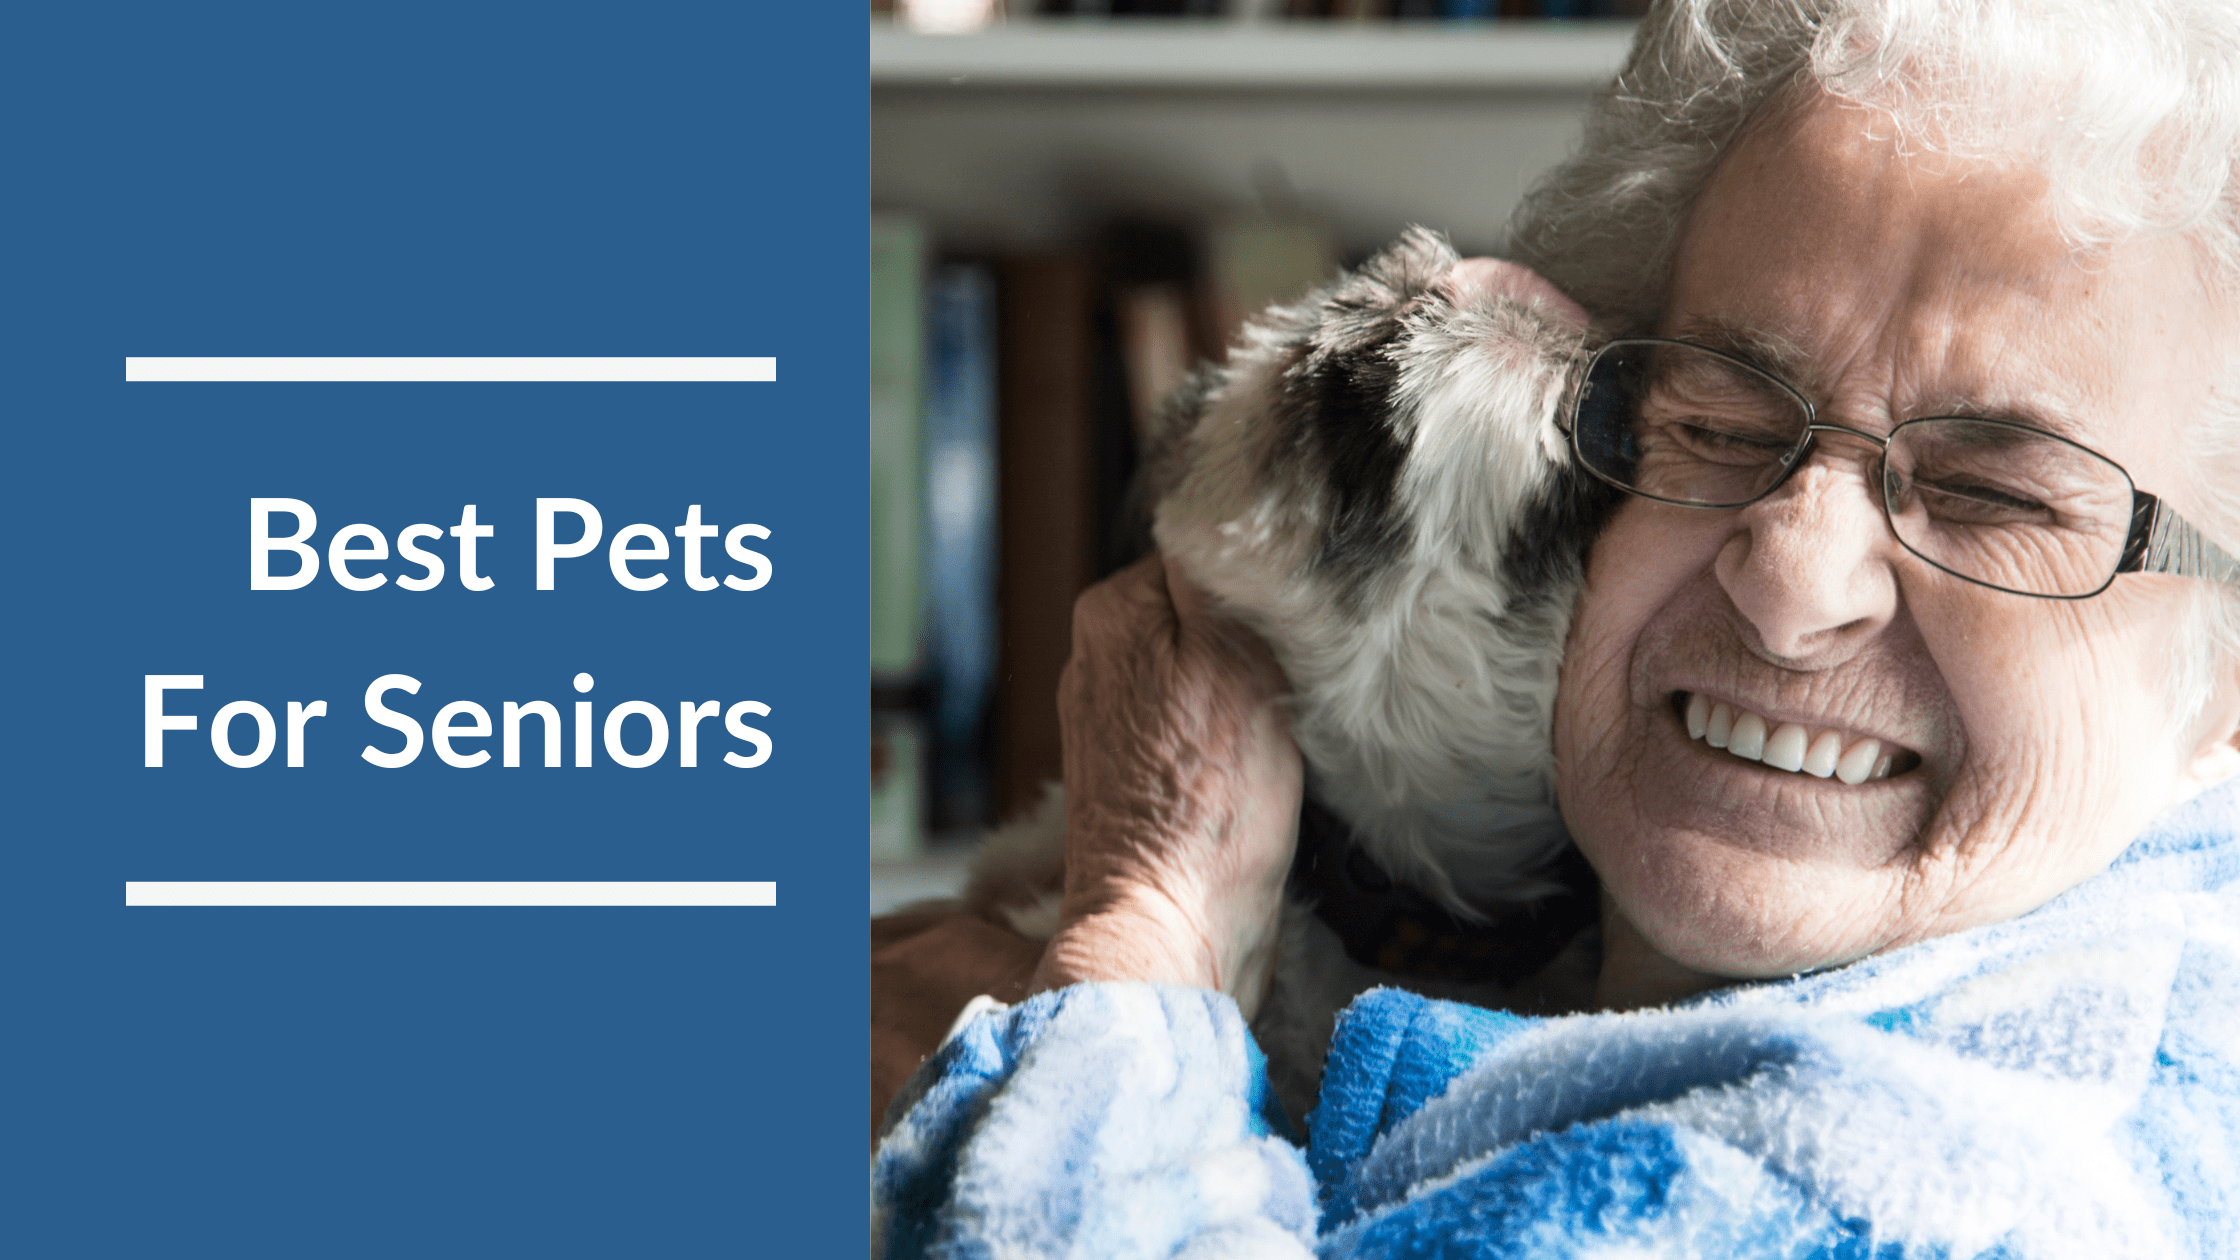 Best Pets For Seniors Featured Image